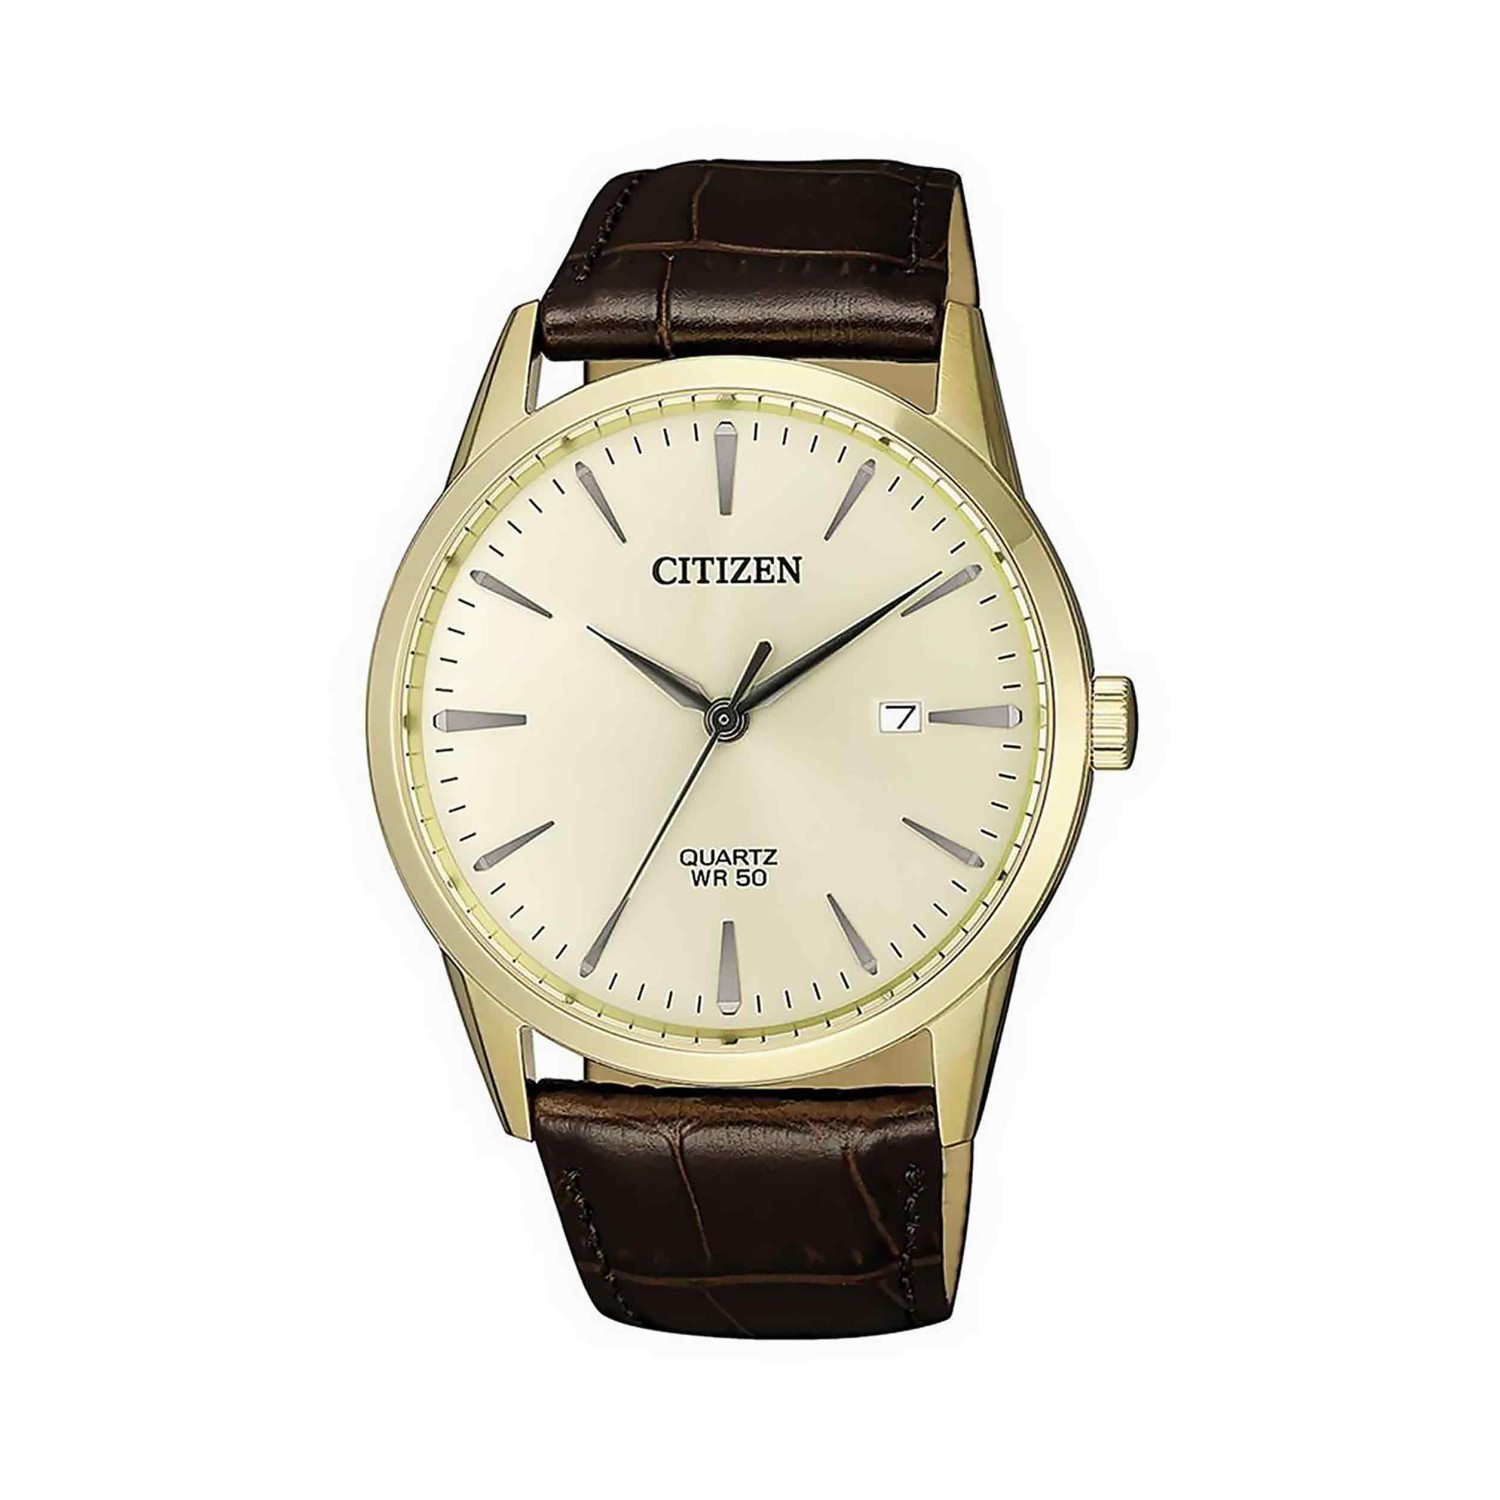 BI5002-14A Citizen Watch. When it comes to this Quartz powered watch from the Gents Dress Collection, sophistication lies in simplicity and reliability. Delivering a sharp look and the durability required for everyday wear, it is crafted from min @christi